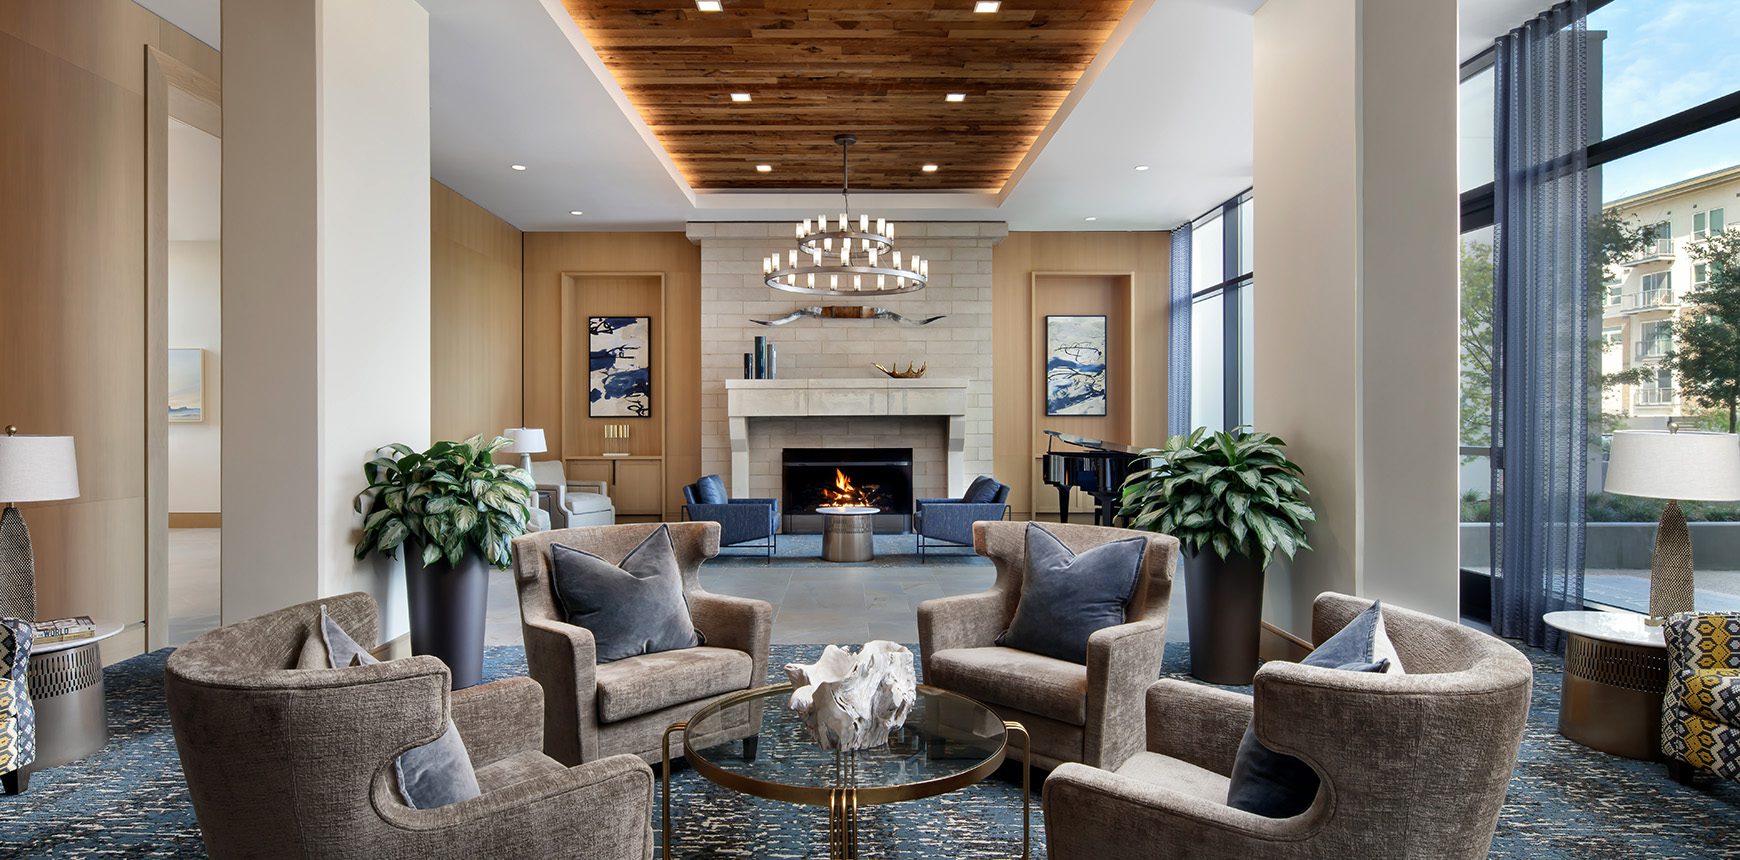 A cozy hotel lobby with a crackling fireplace and comfortable chairs, inviting guests to relax and unwind.